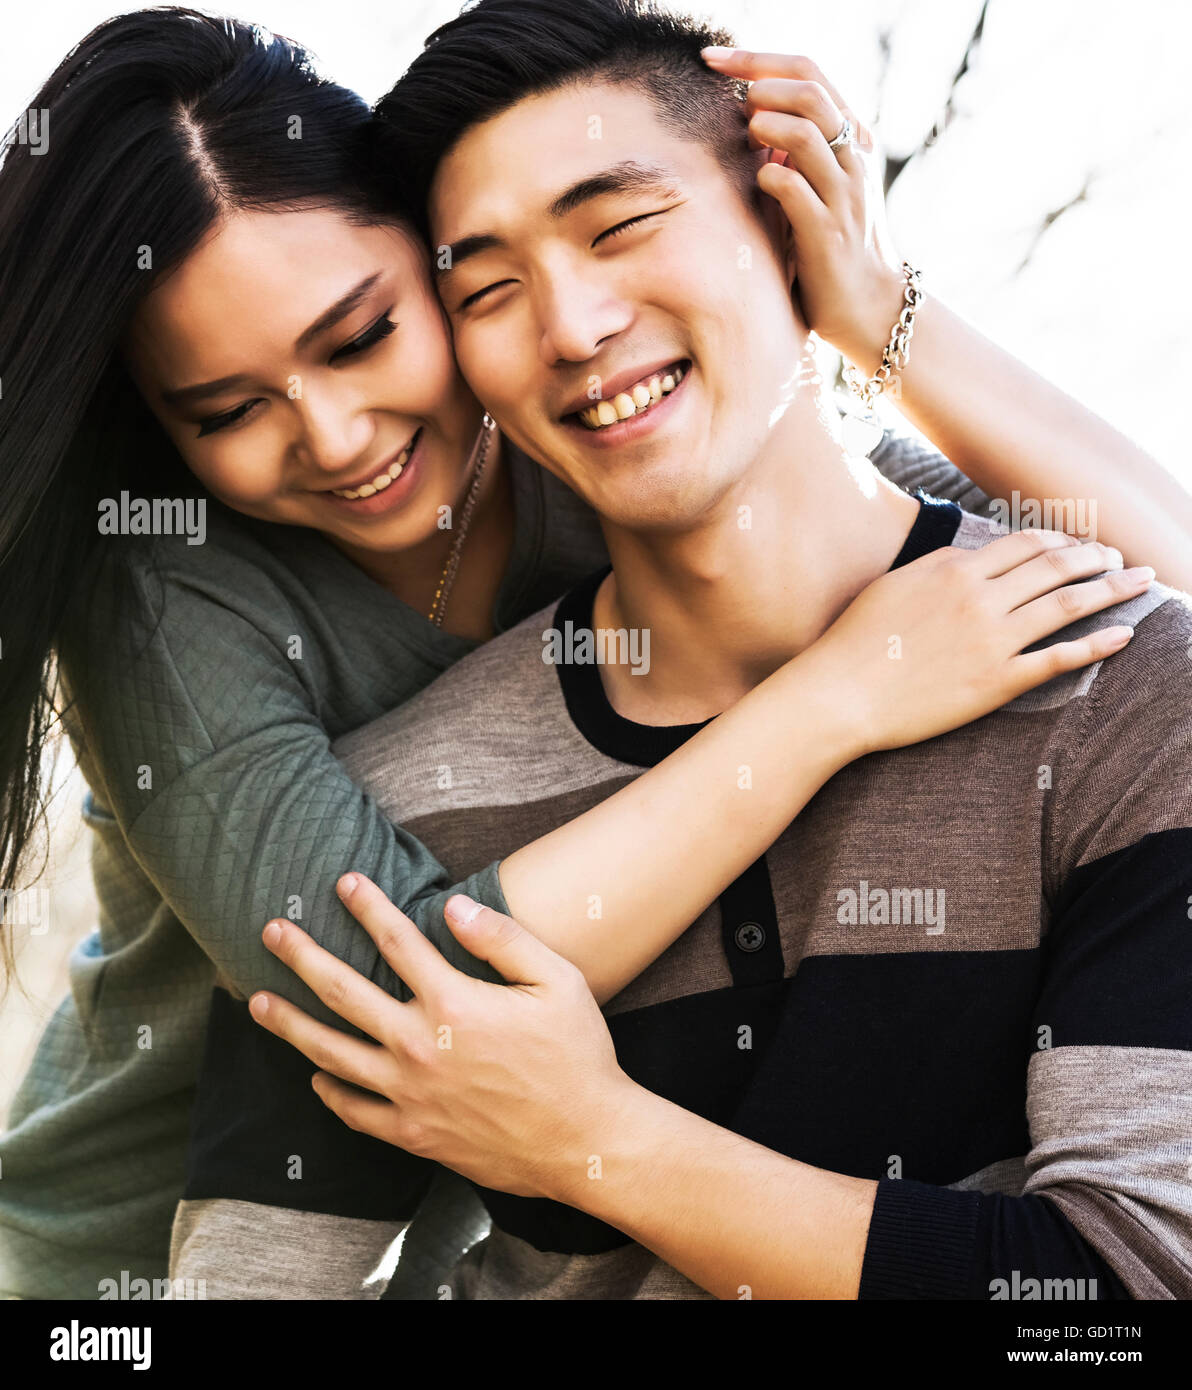 A Young Asian Couple Enjoying Quality Time Together Outdoors In A Park  In Autumn And Embracing Each Other In The Warmth Of The Sunlight During The... Stock Photo